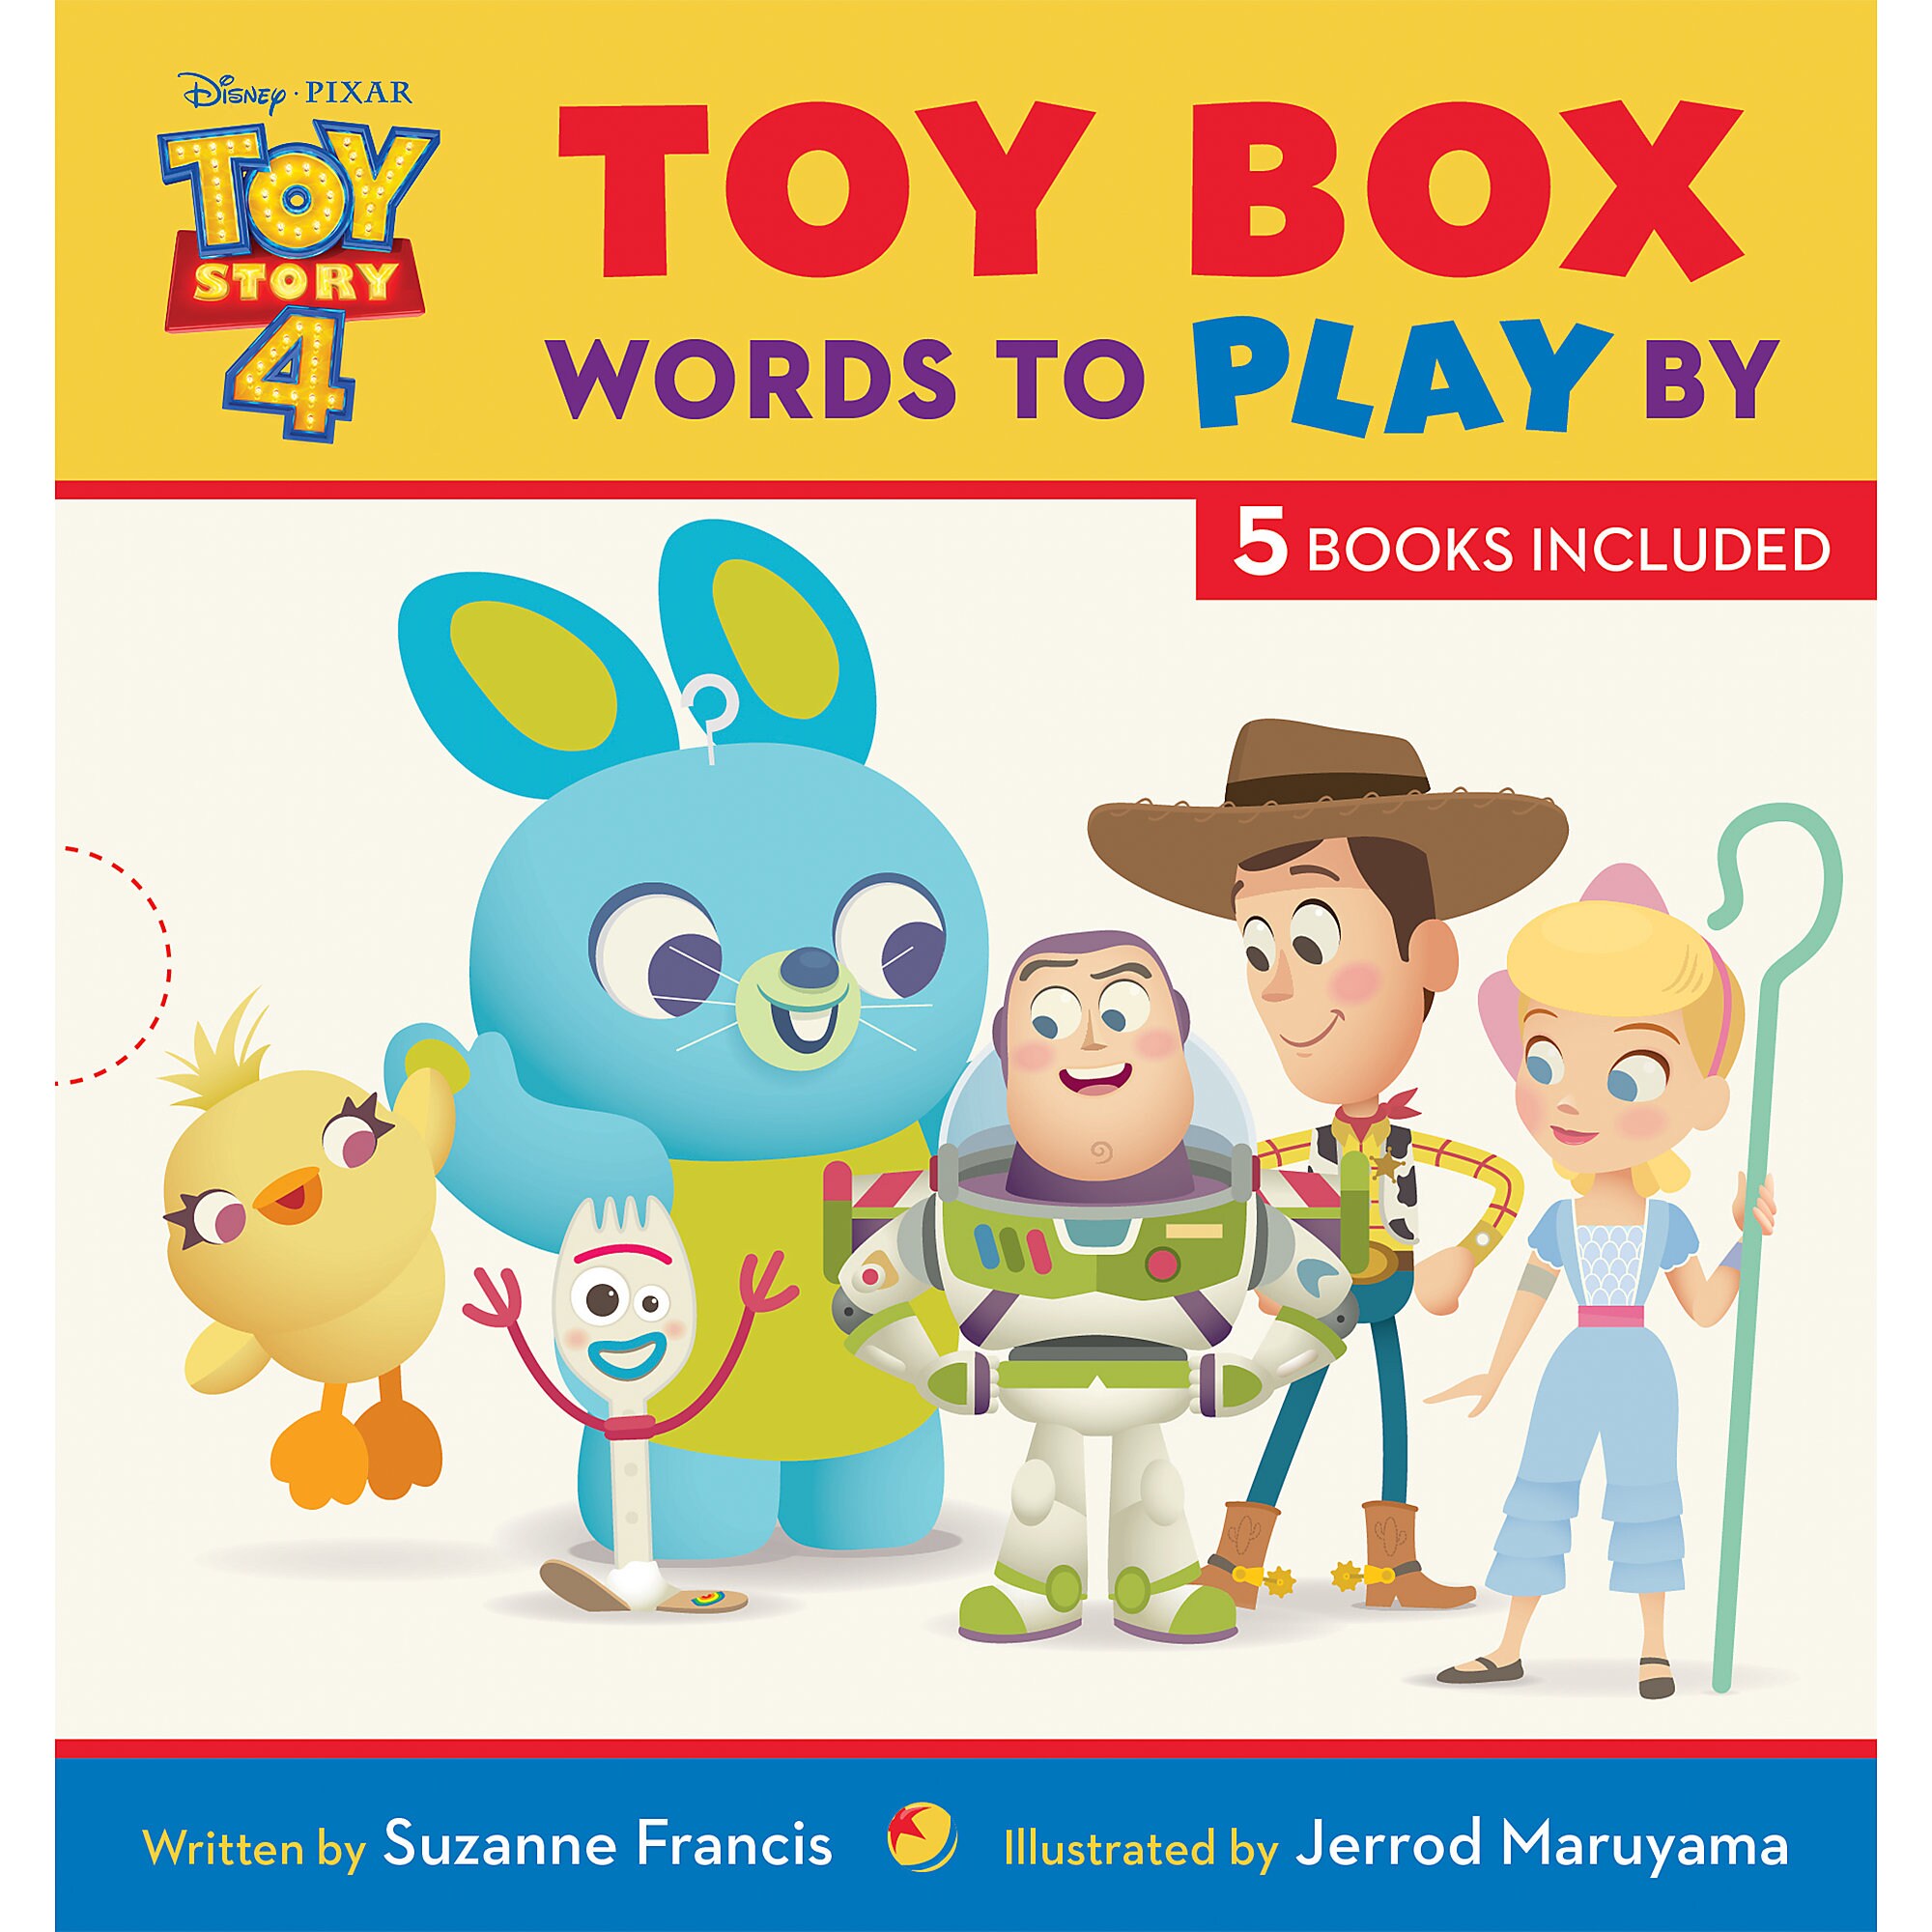 Toy Story 4: Toy Box Words to Play By Book